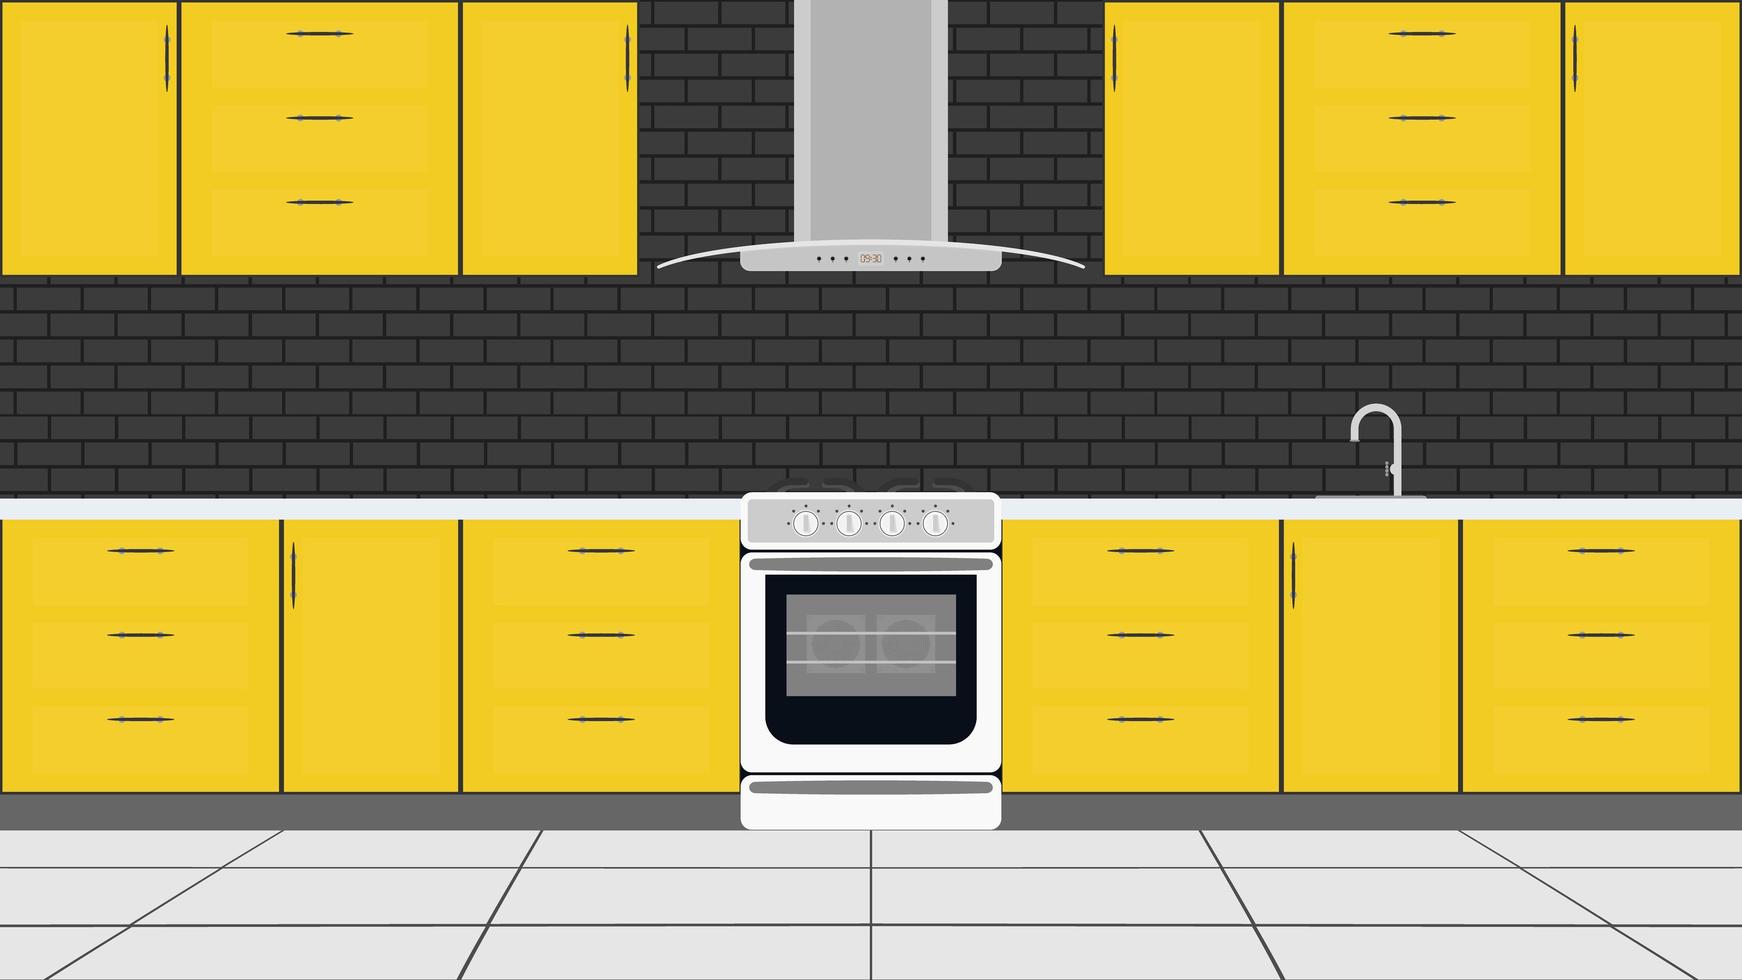 Stylish kitchen in a flat style. Yellow Kitchen Cabinets, Stove, Oven. Vector. vector